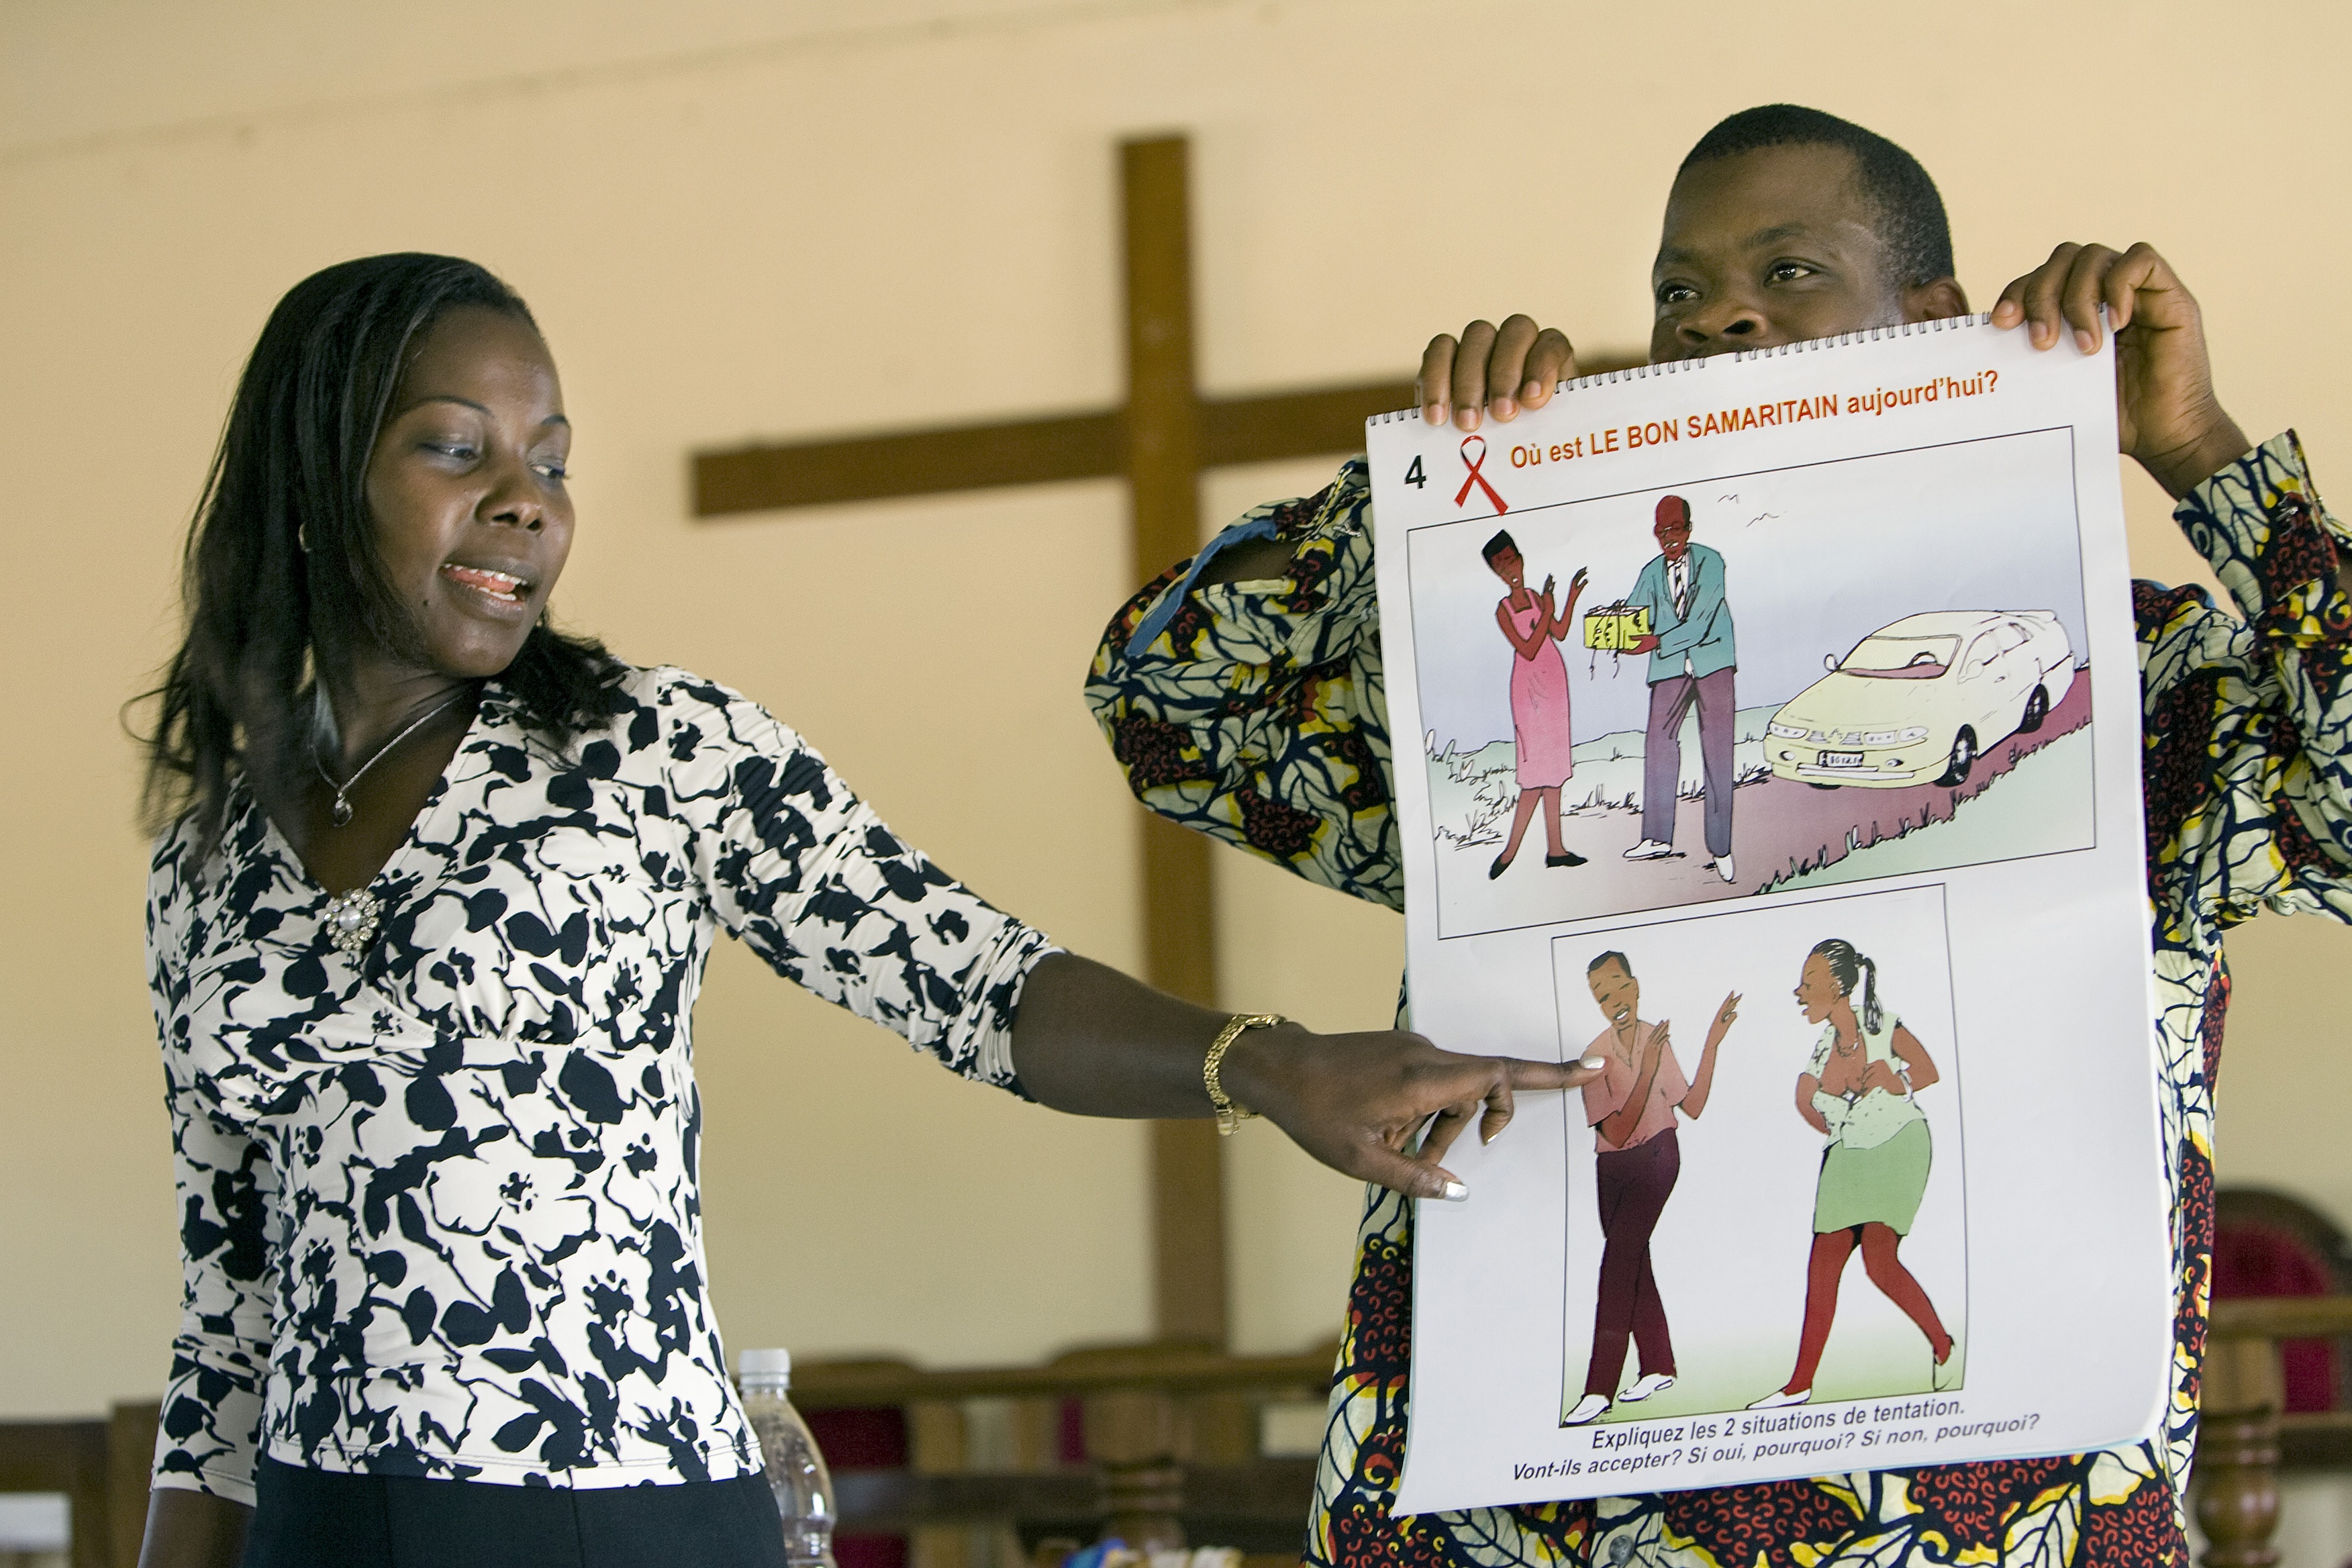 An educator from the Alliance Biblique de Côte d'Ivoire conducts a public health lesson on AIDS in the sanctuary at Jerusalem Parish United Methodist Church in Yamoussoukro, Côte d'Ivoire in this November 2008 file photo. Preventive education is among the topics that will be discussed during the United Methodist Global HIV/AIDS Committee West Africa Summit May 19-21 in Abidjan. File photo by Mike DuBose, UMNS.